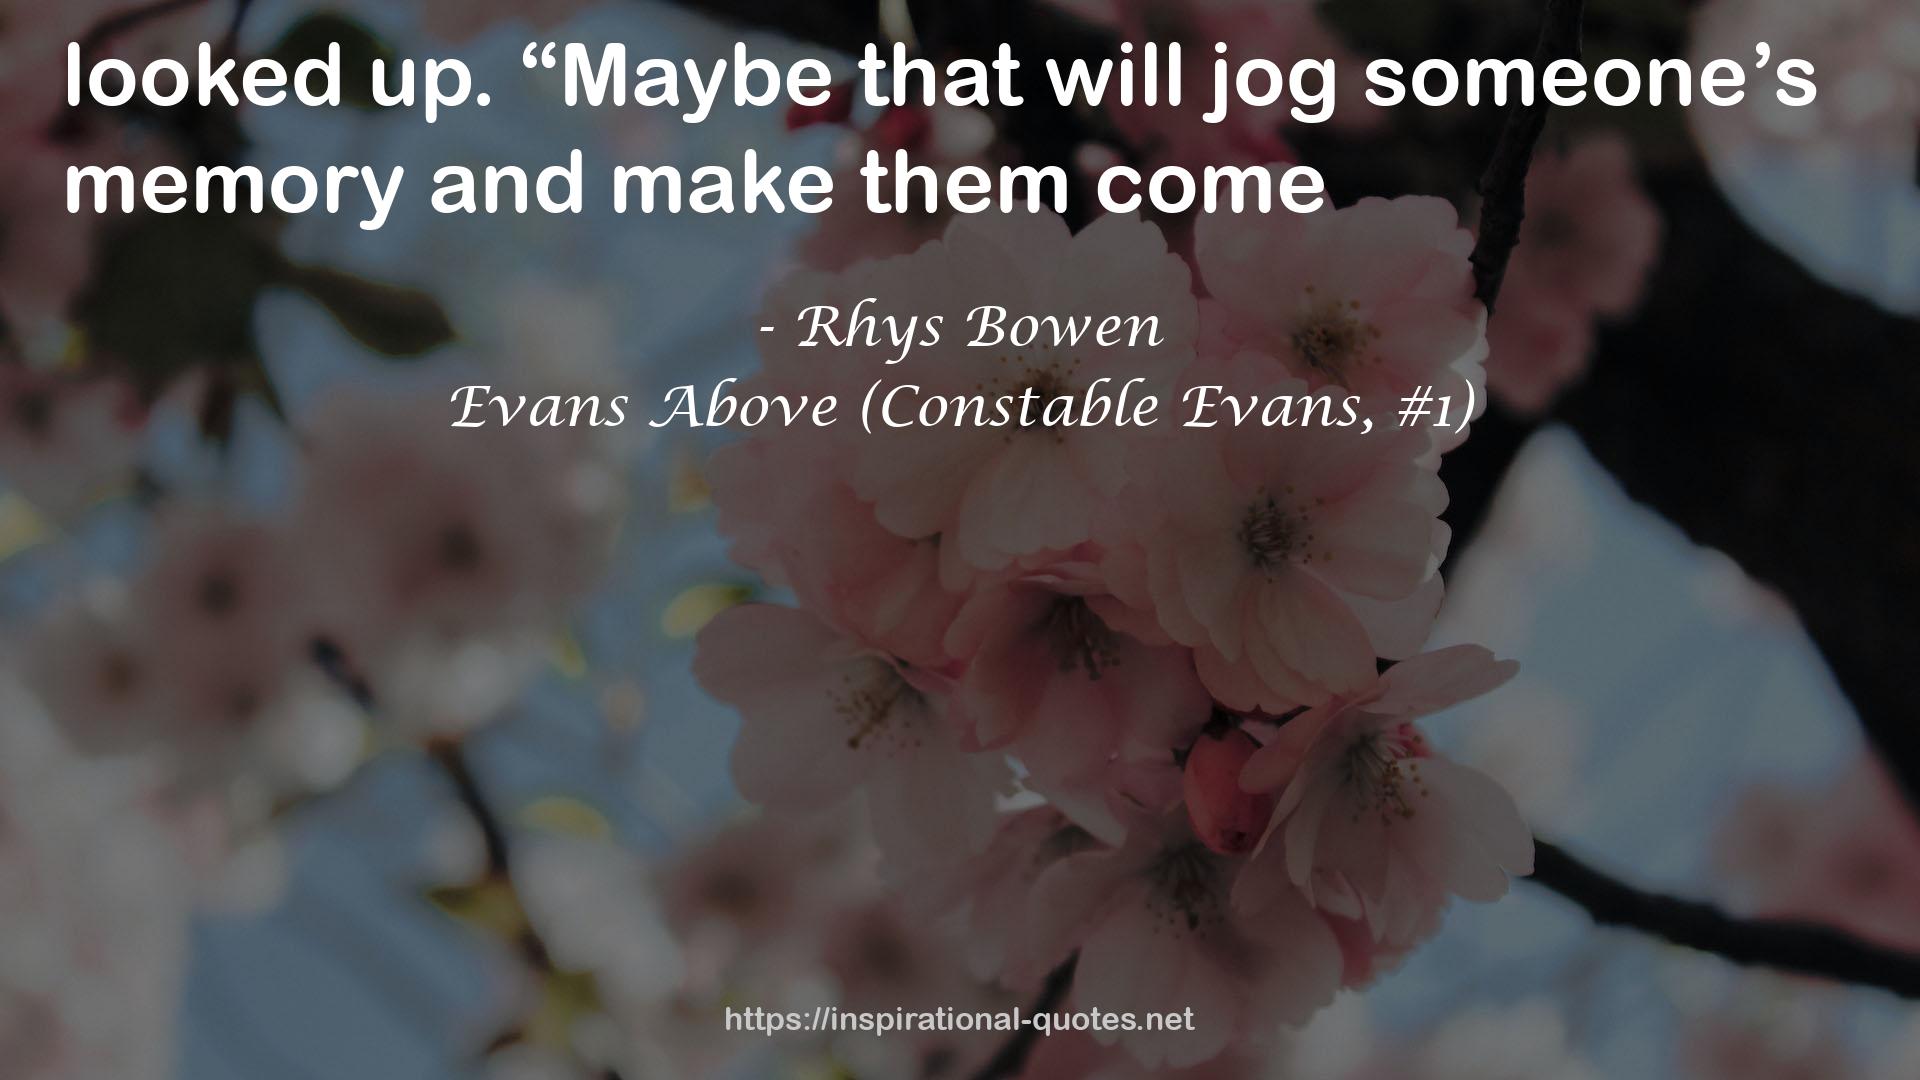 Evans Above (Constable Evans, #1) QUOTES